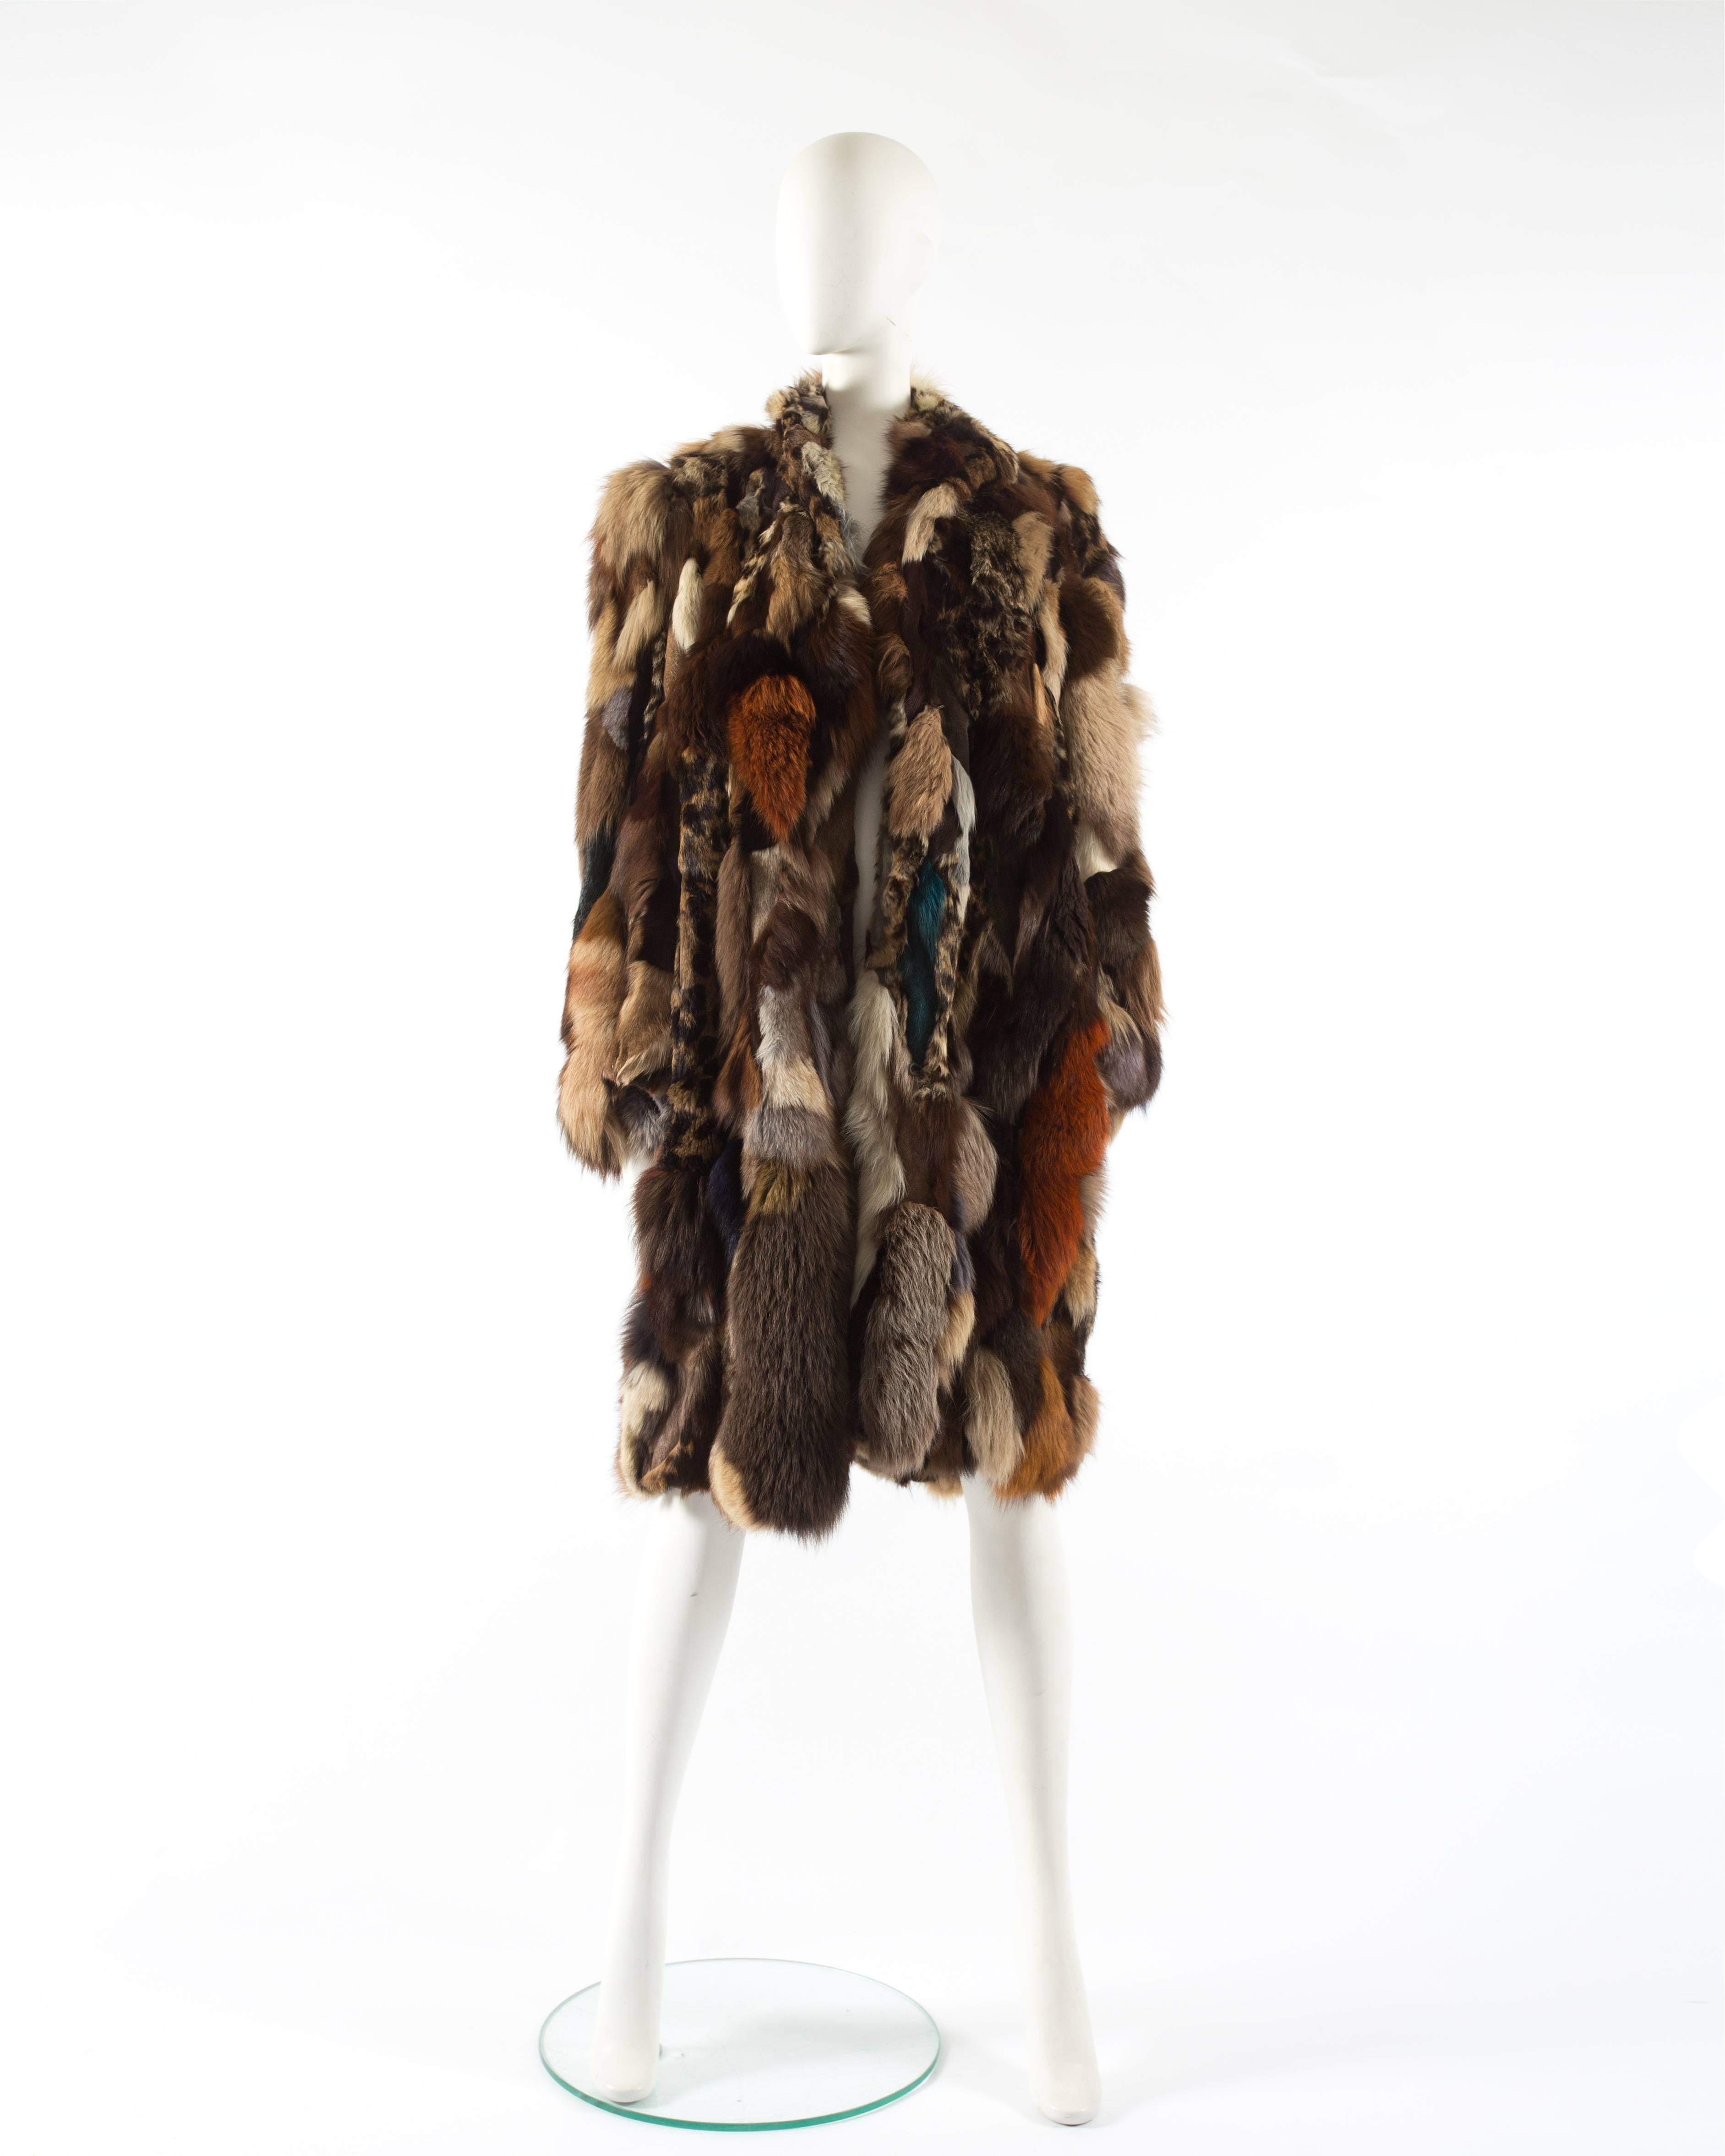 Patchwork fur coat by 'Octopus', circa 1970s. Oversized style, fox and mink fur, various prints and colors throughout, two side pockets, hidden hook-and-eye closures at the front and novelty print lining. 